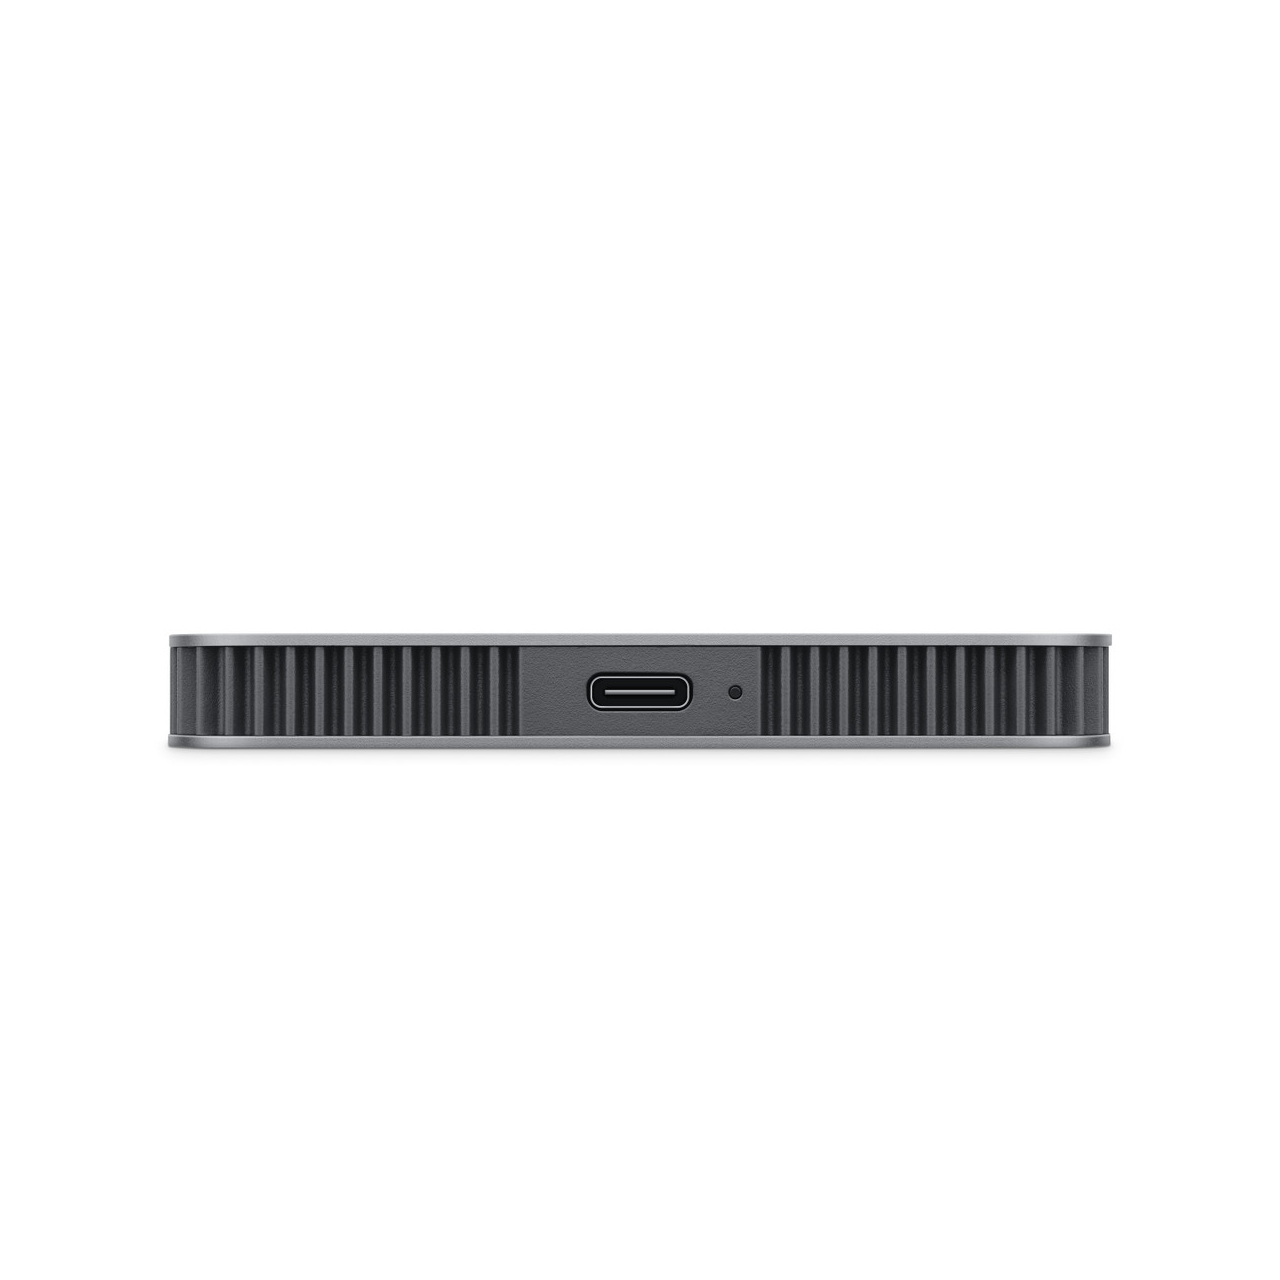 2TB MOBILE DRIVE SECURE USB 3.1-C SPACE GREY-1